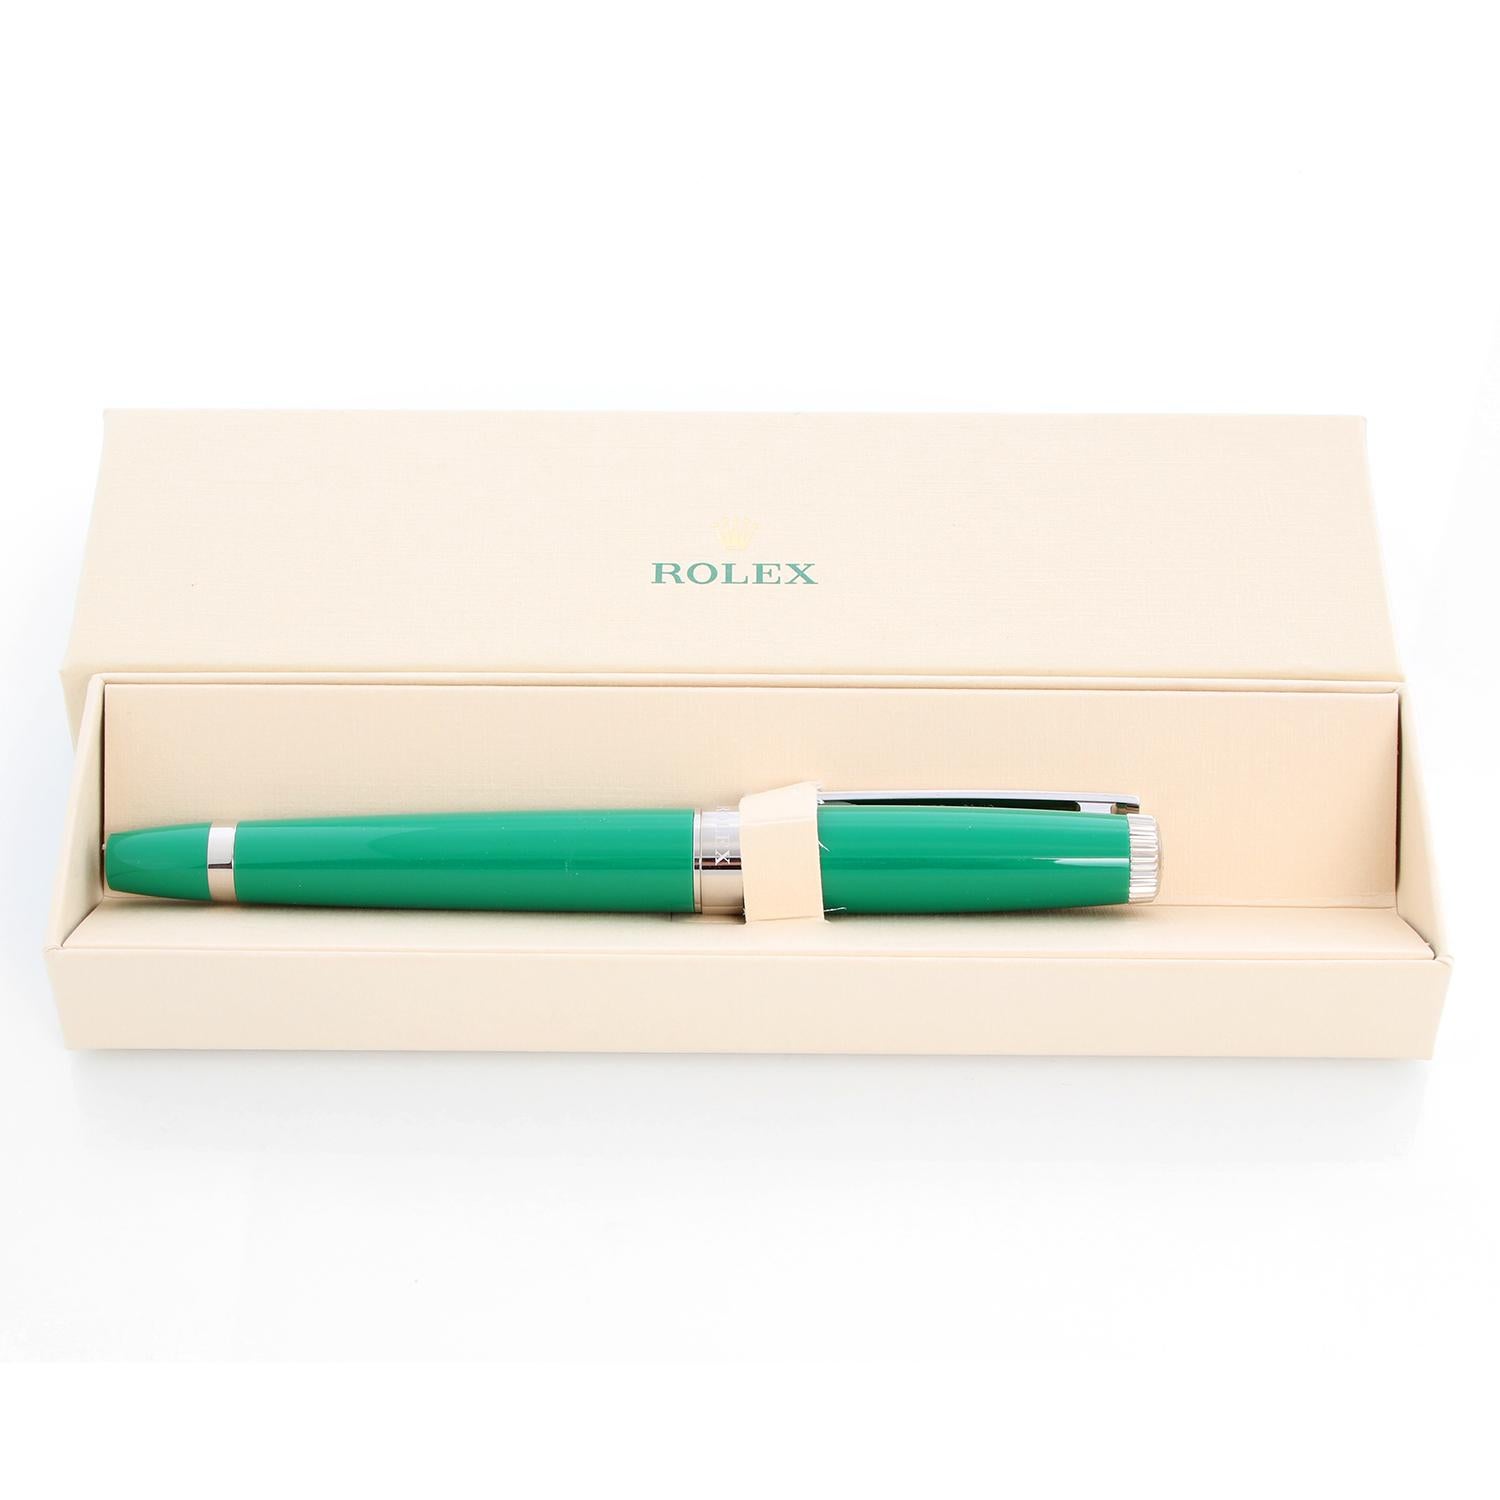 Rolex Boutique Ballpoint Green Pen  -  For VIP customers by Rolex boutiques. Unused with Rolex box. Green ink. Measures 5 .5 inches.